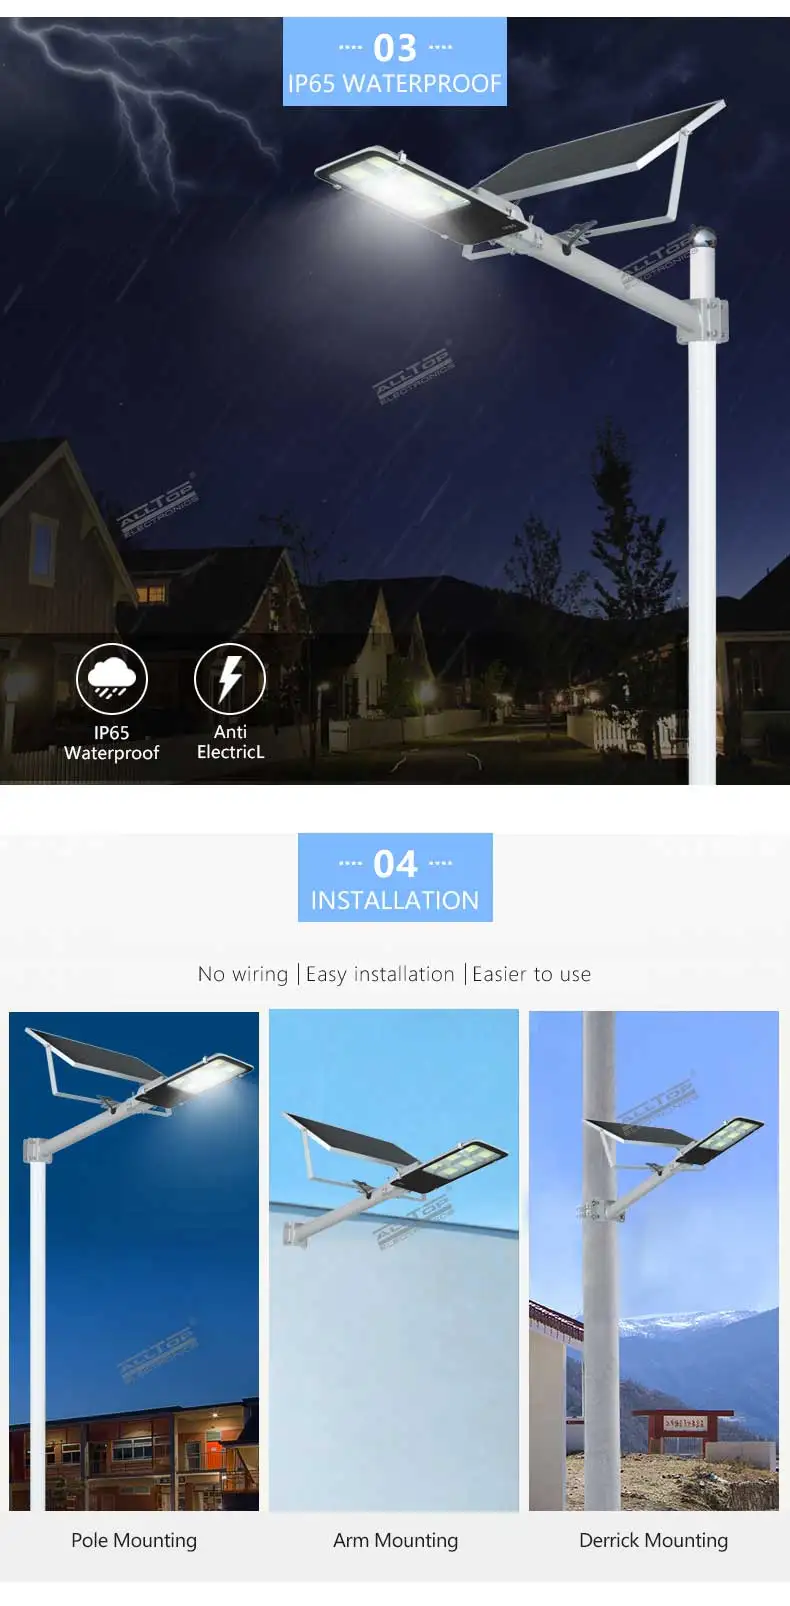 ALLTOP 3 Years warranty CE RoHS remote control IP65 150w all in one solar led street light